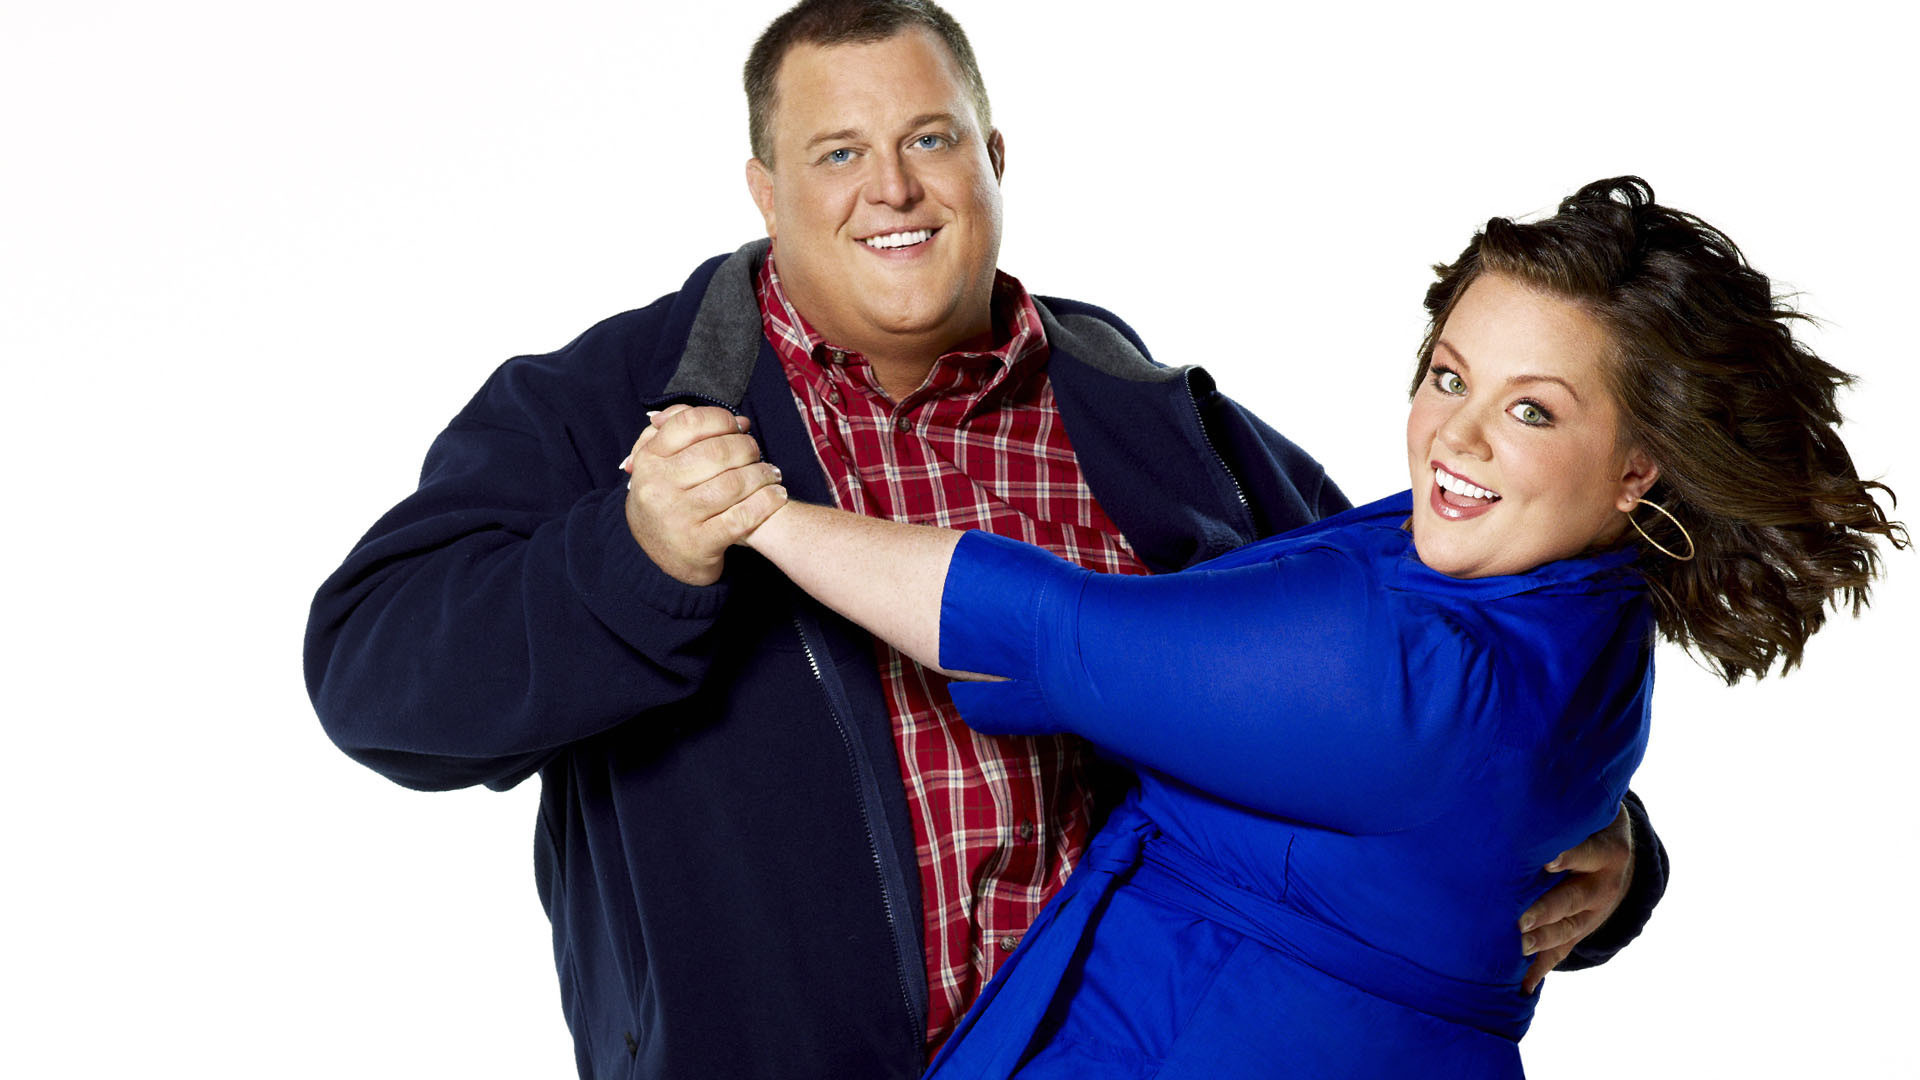 Show Mike & Molly